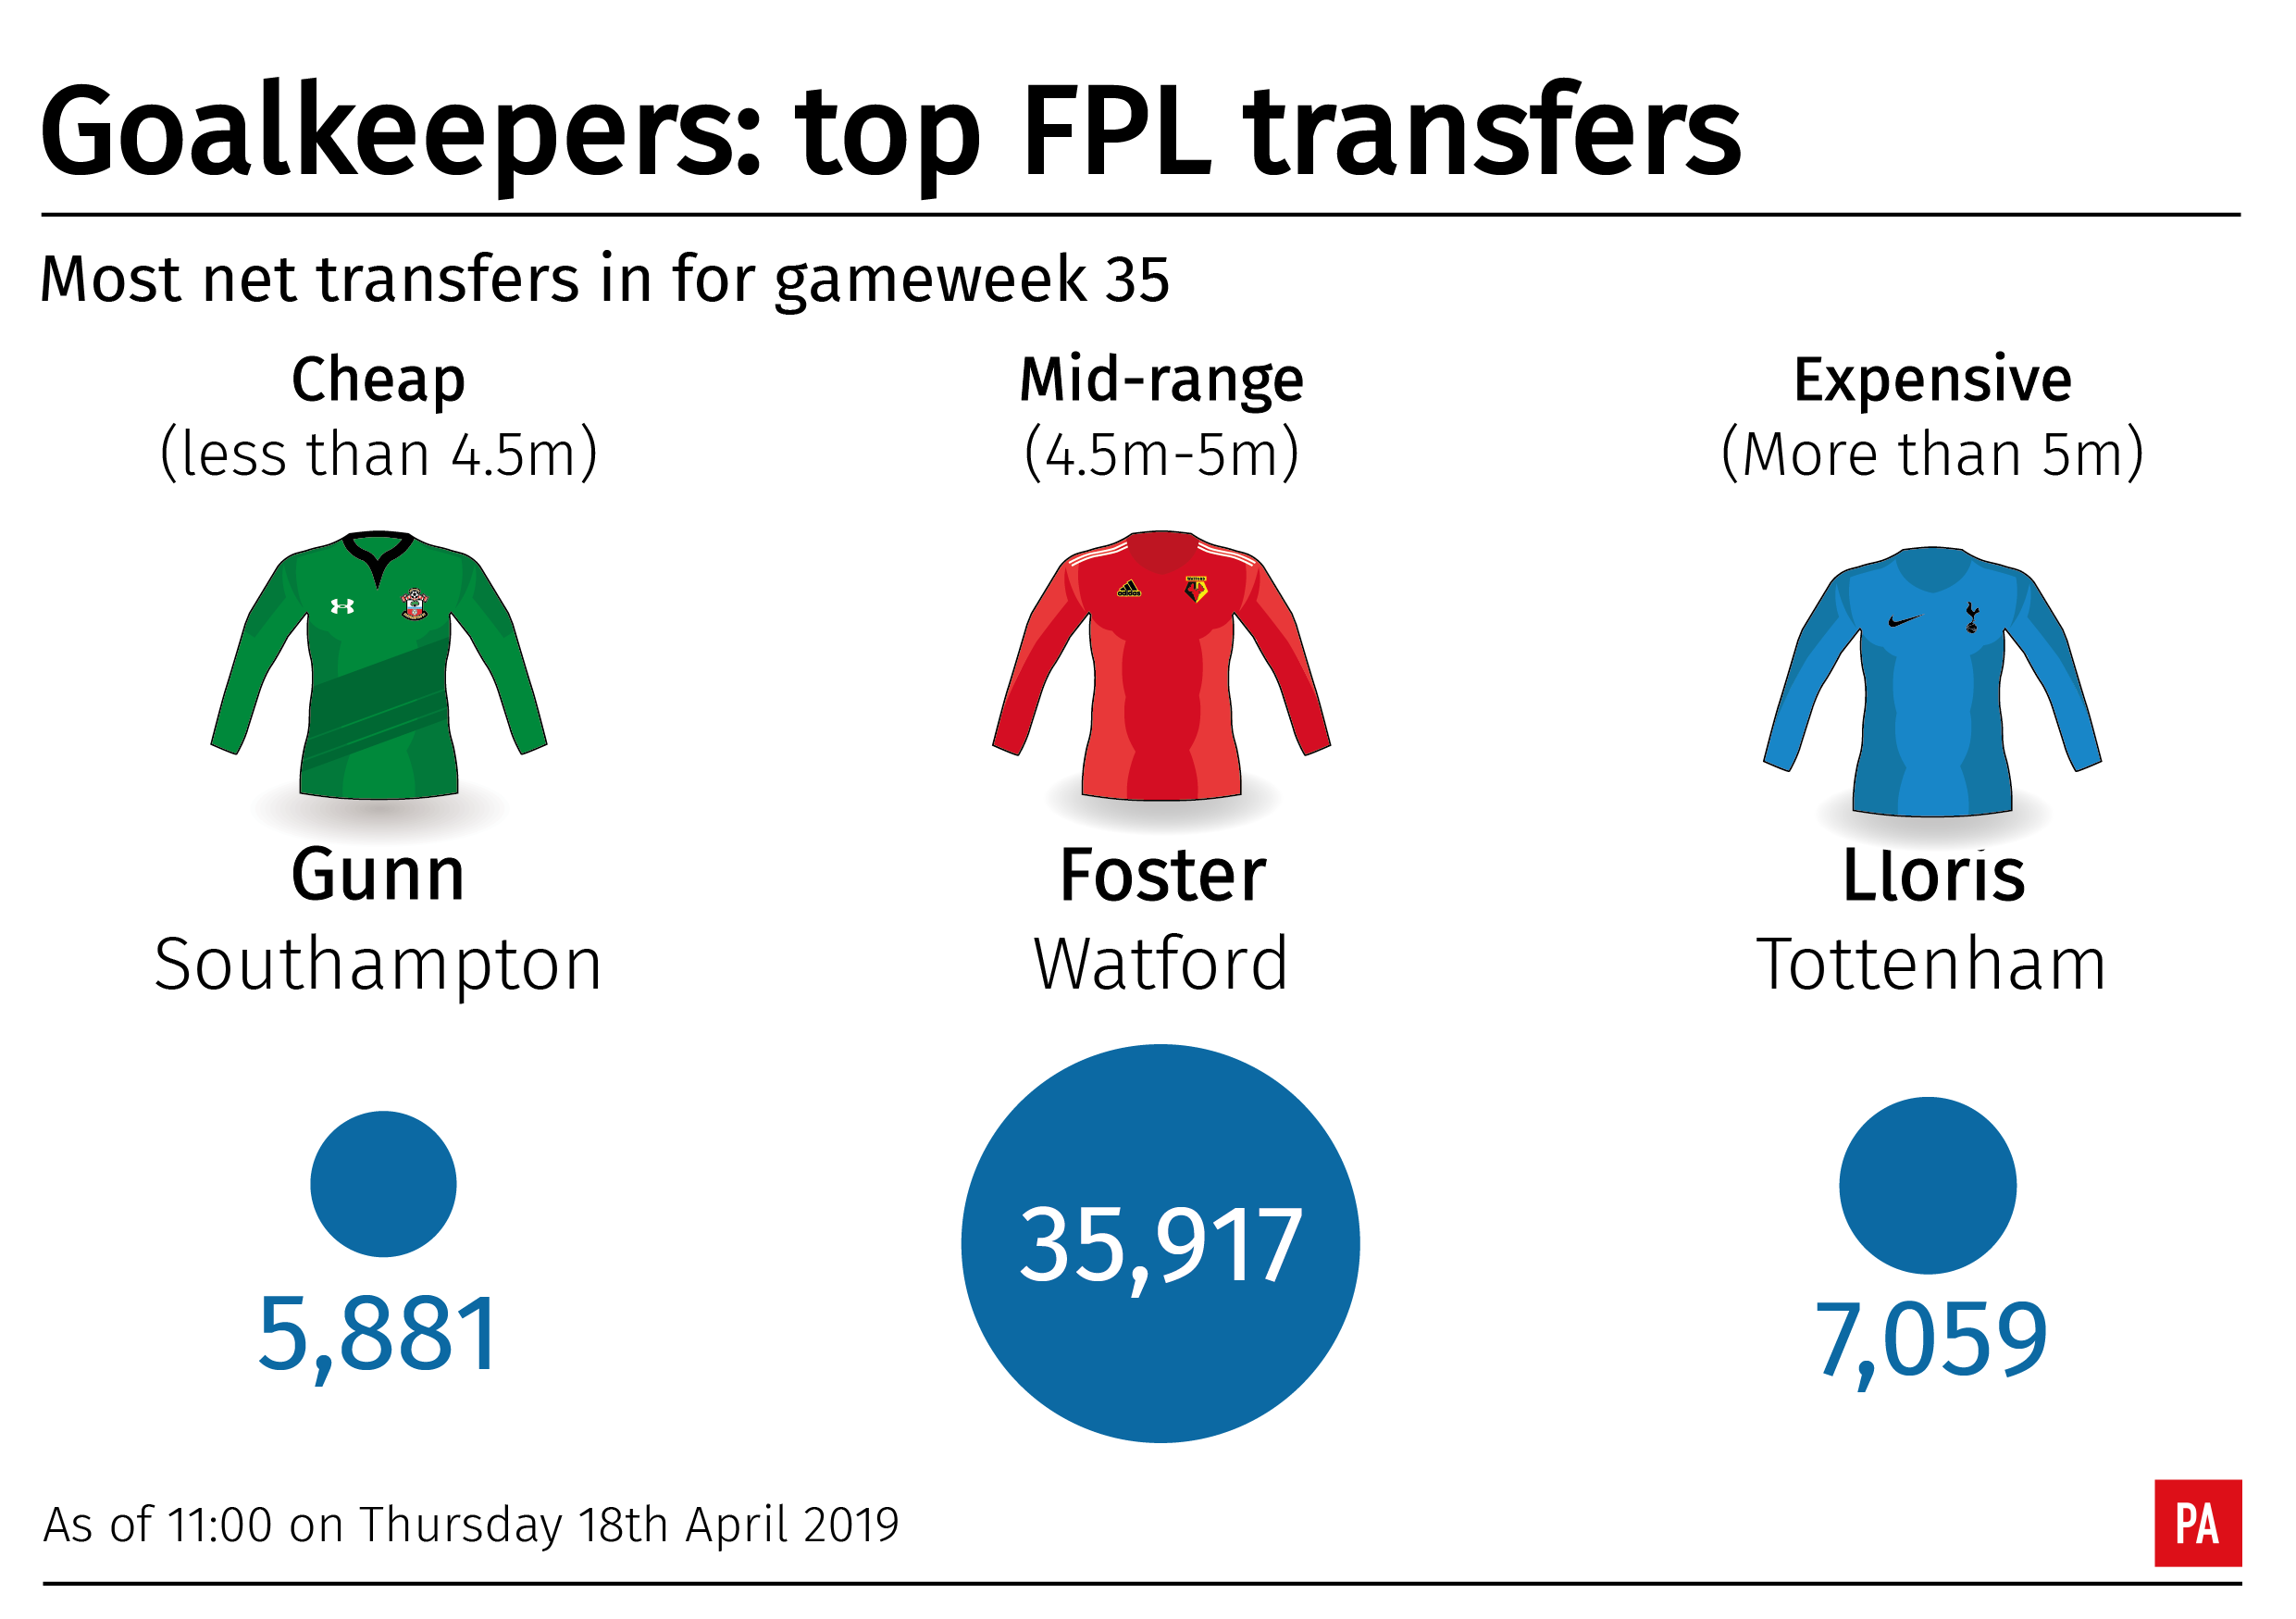 Three of the most popular goalkeepers for Fantasy Premier League managers ahead of gameweek 35